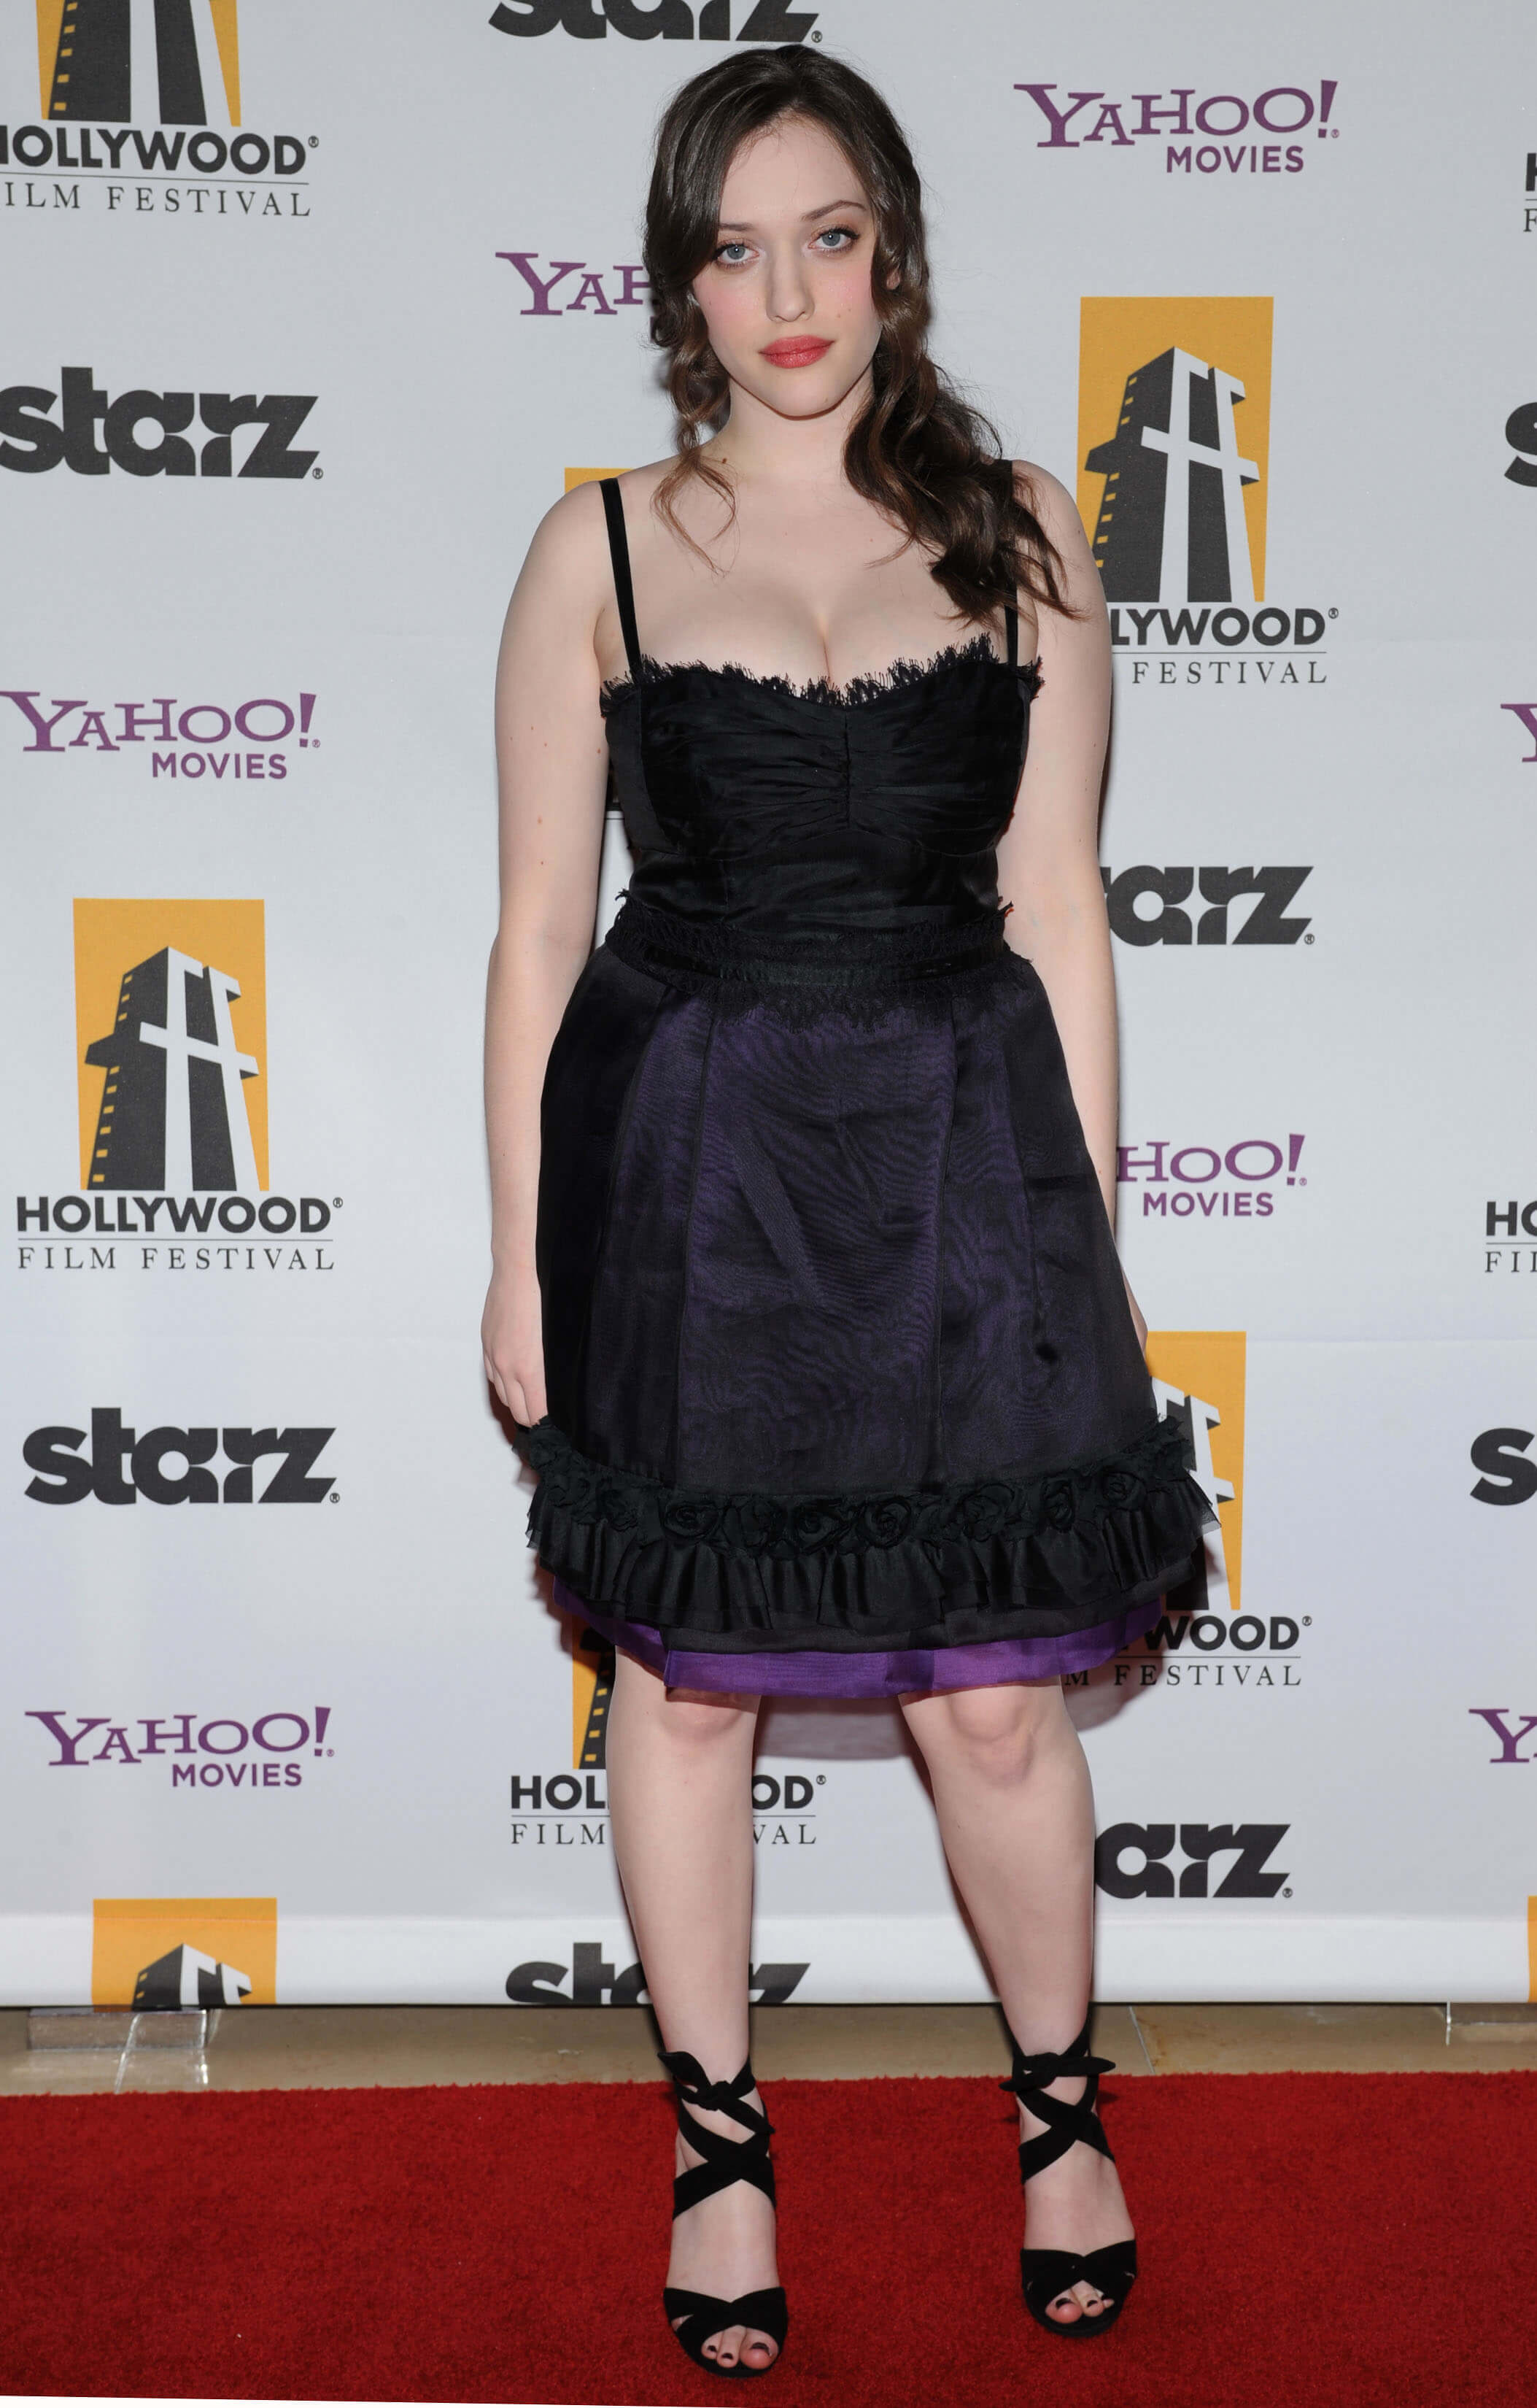 49 Sexy Kat Dennings Feet Pictures Are Too Delicious For All Her Fans | Best Of Comic Books